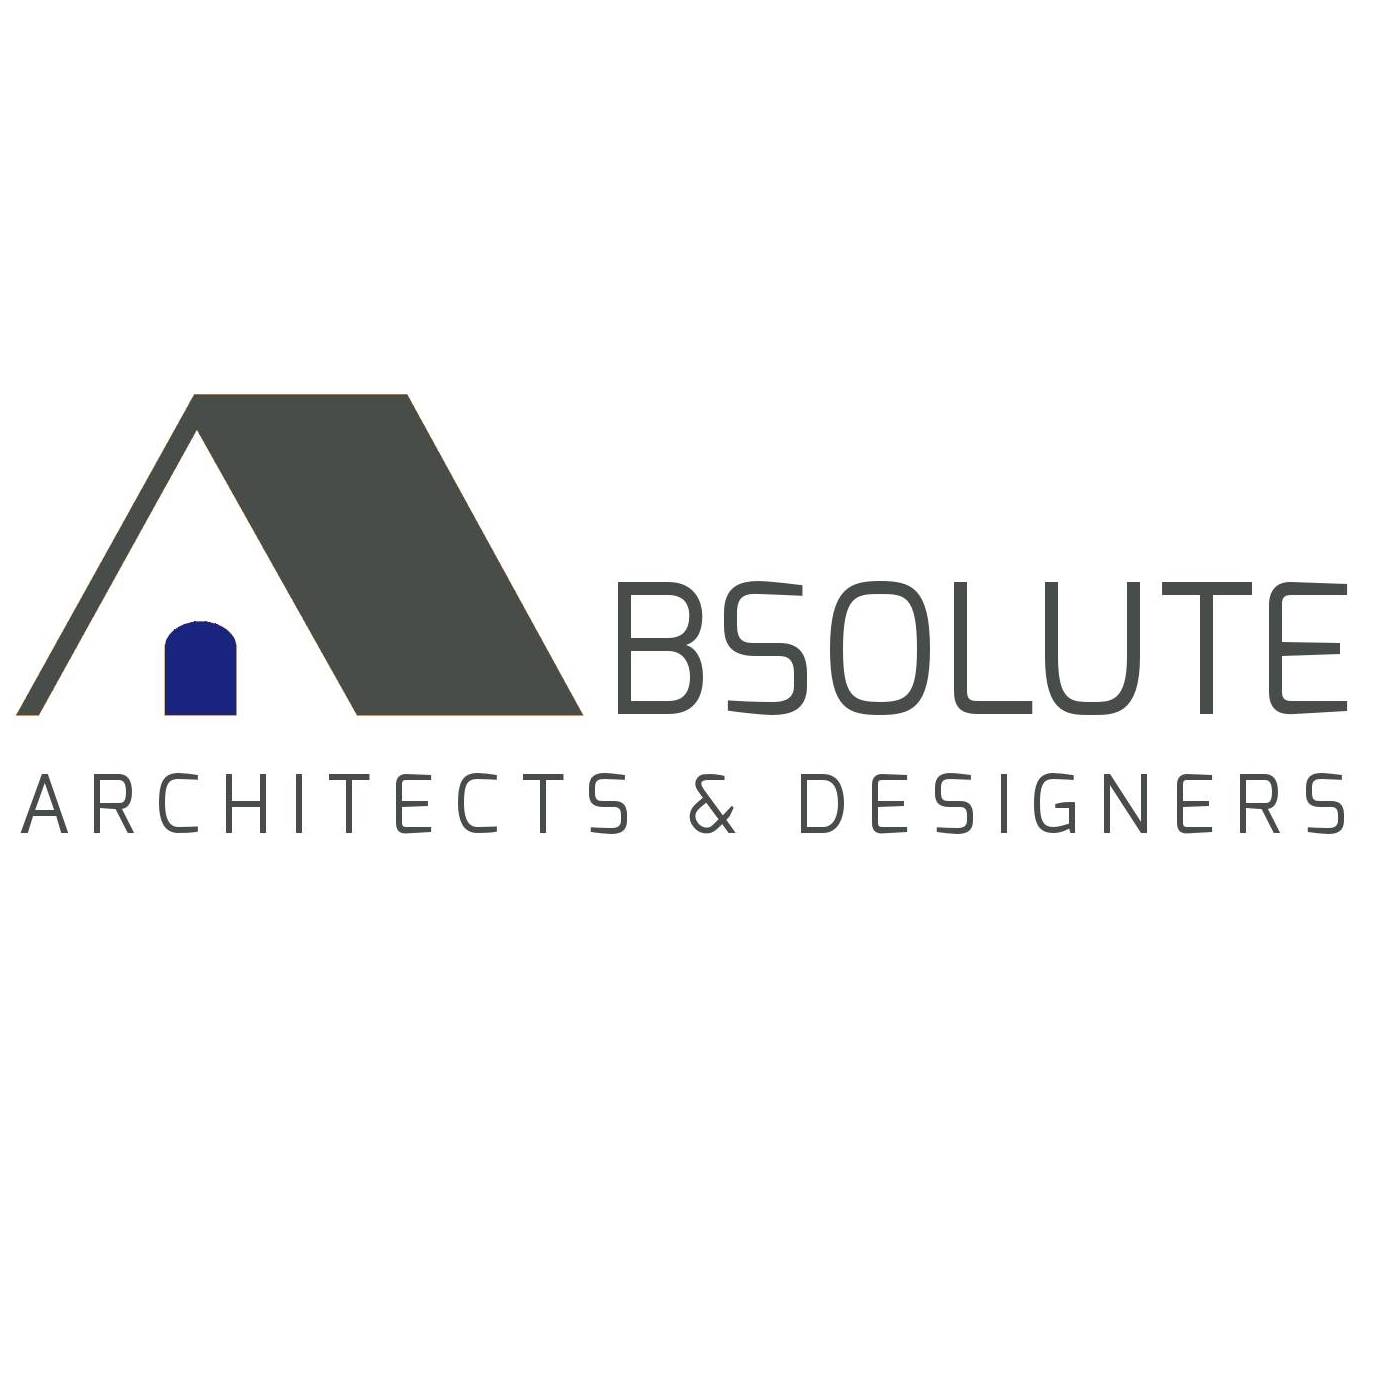 ABSOLUTE Architects and Designers|Accounting Services|Professional Services